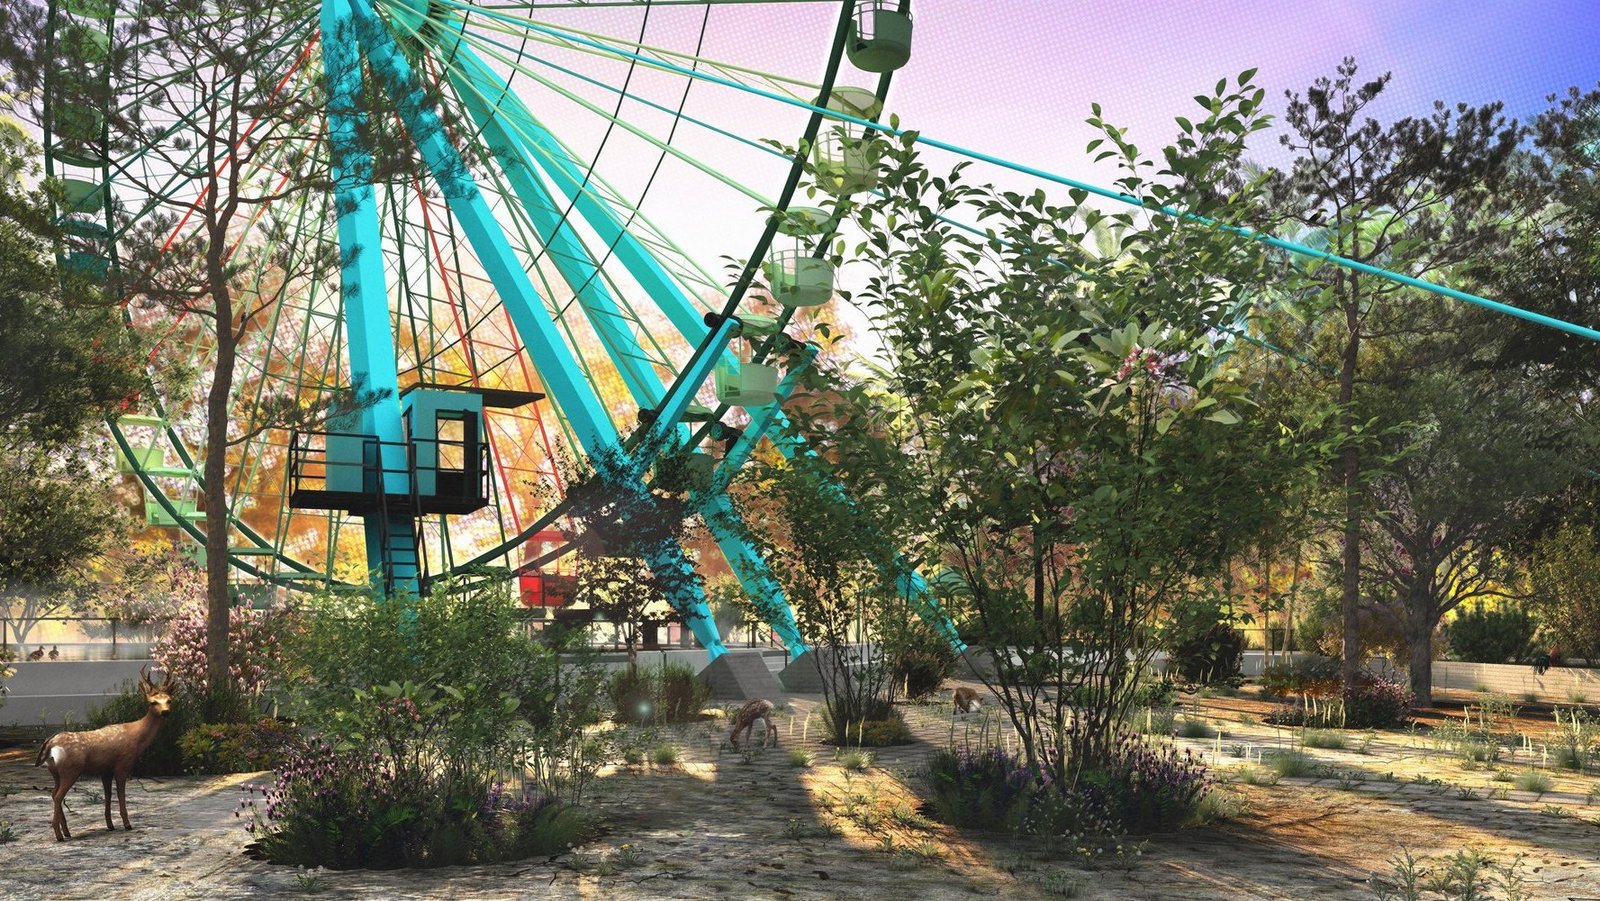 Tuscora Park Ferris wheel to be dedicated after rebuilding project